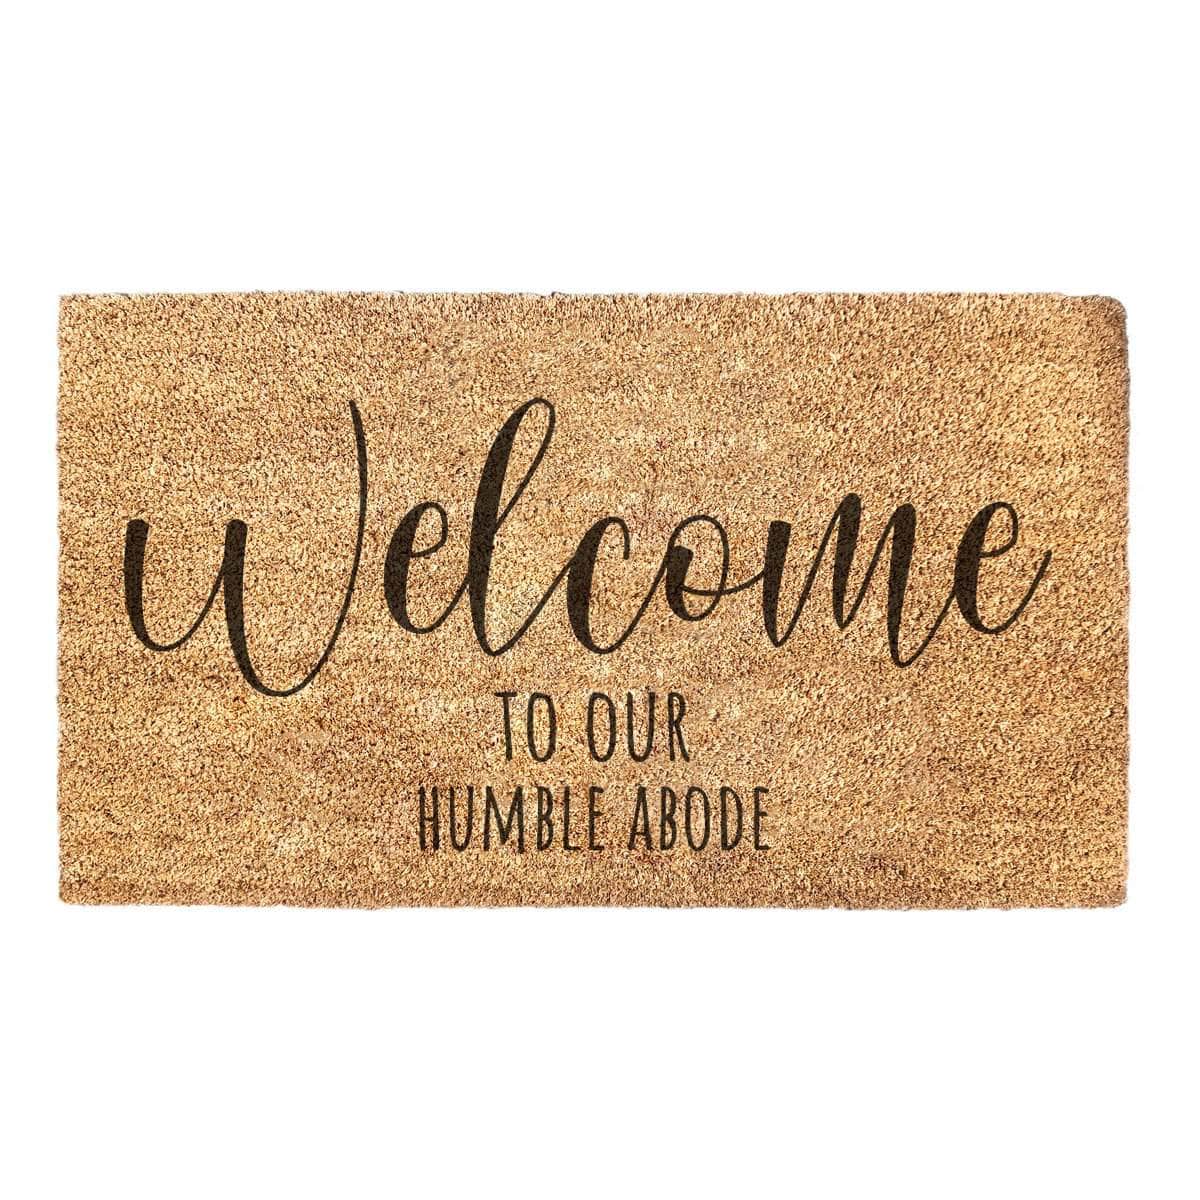 Welcome To Our Humble Abode - Doormat